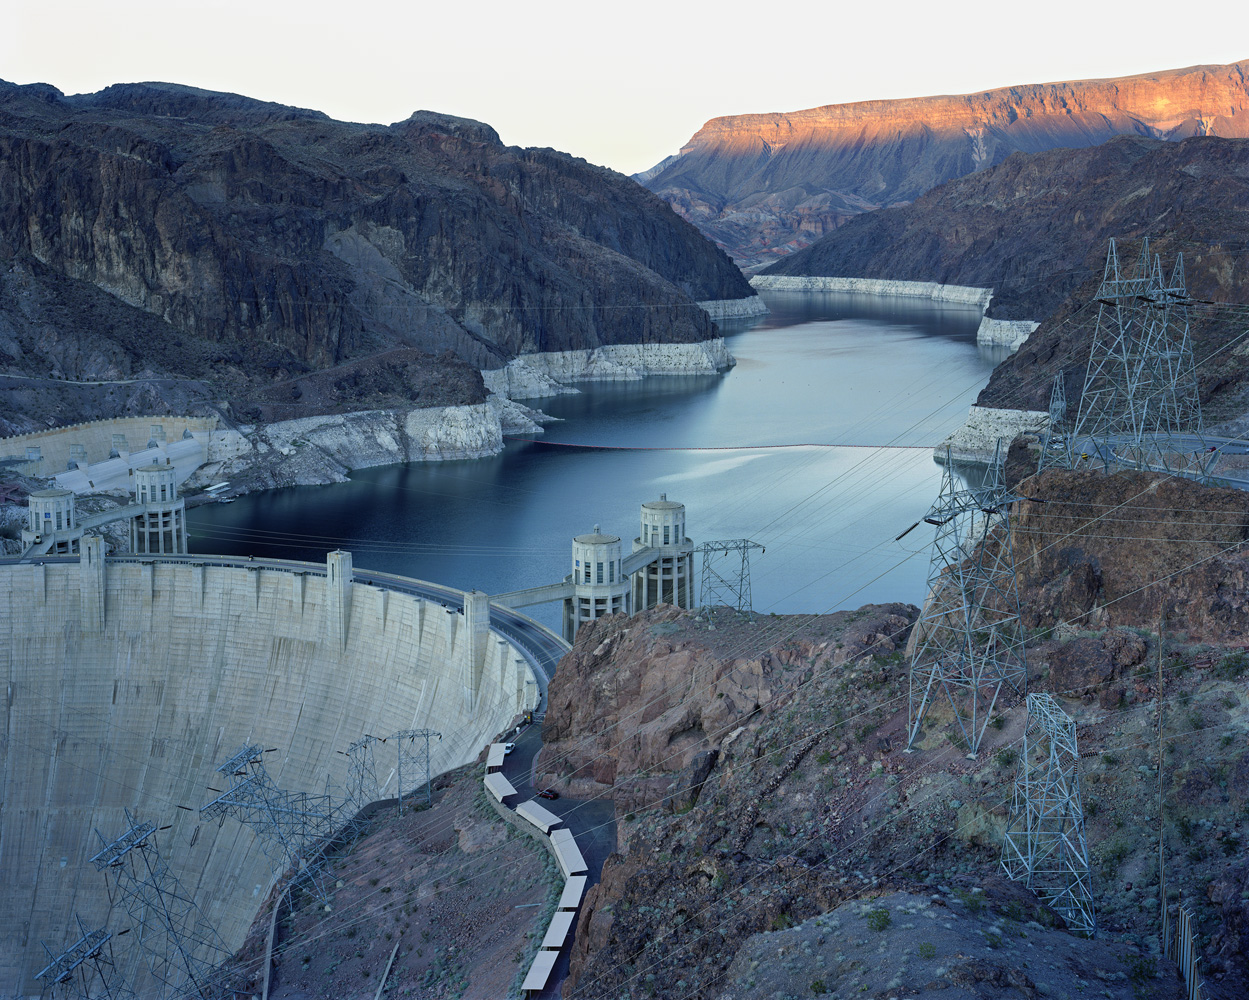 Hoover Dam and Lake Mead, Nev./Ariz., 2007